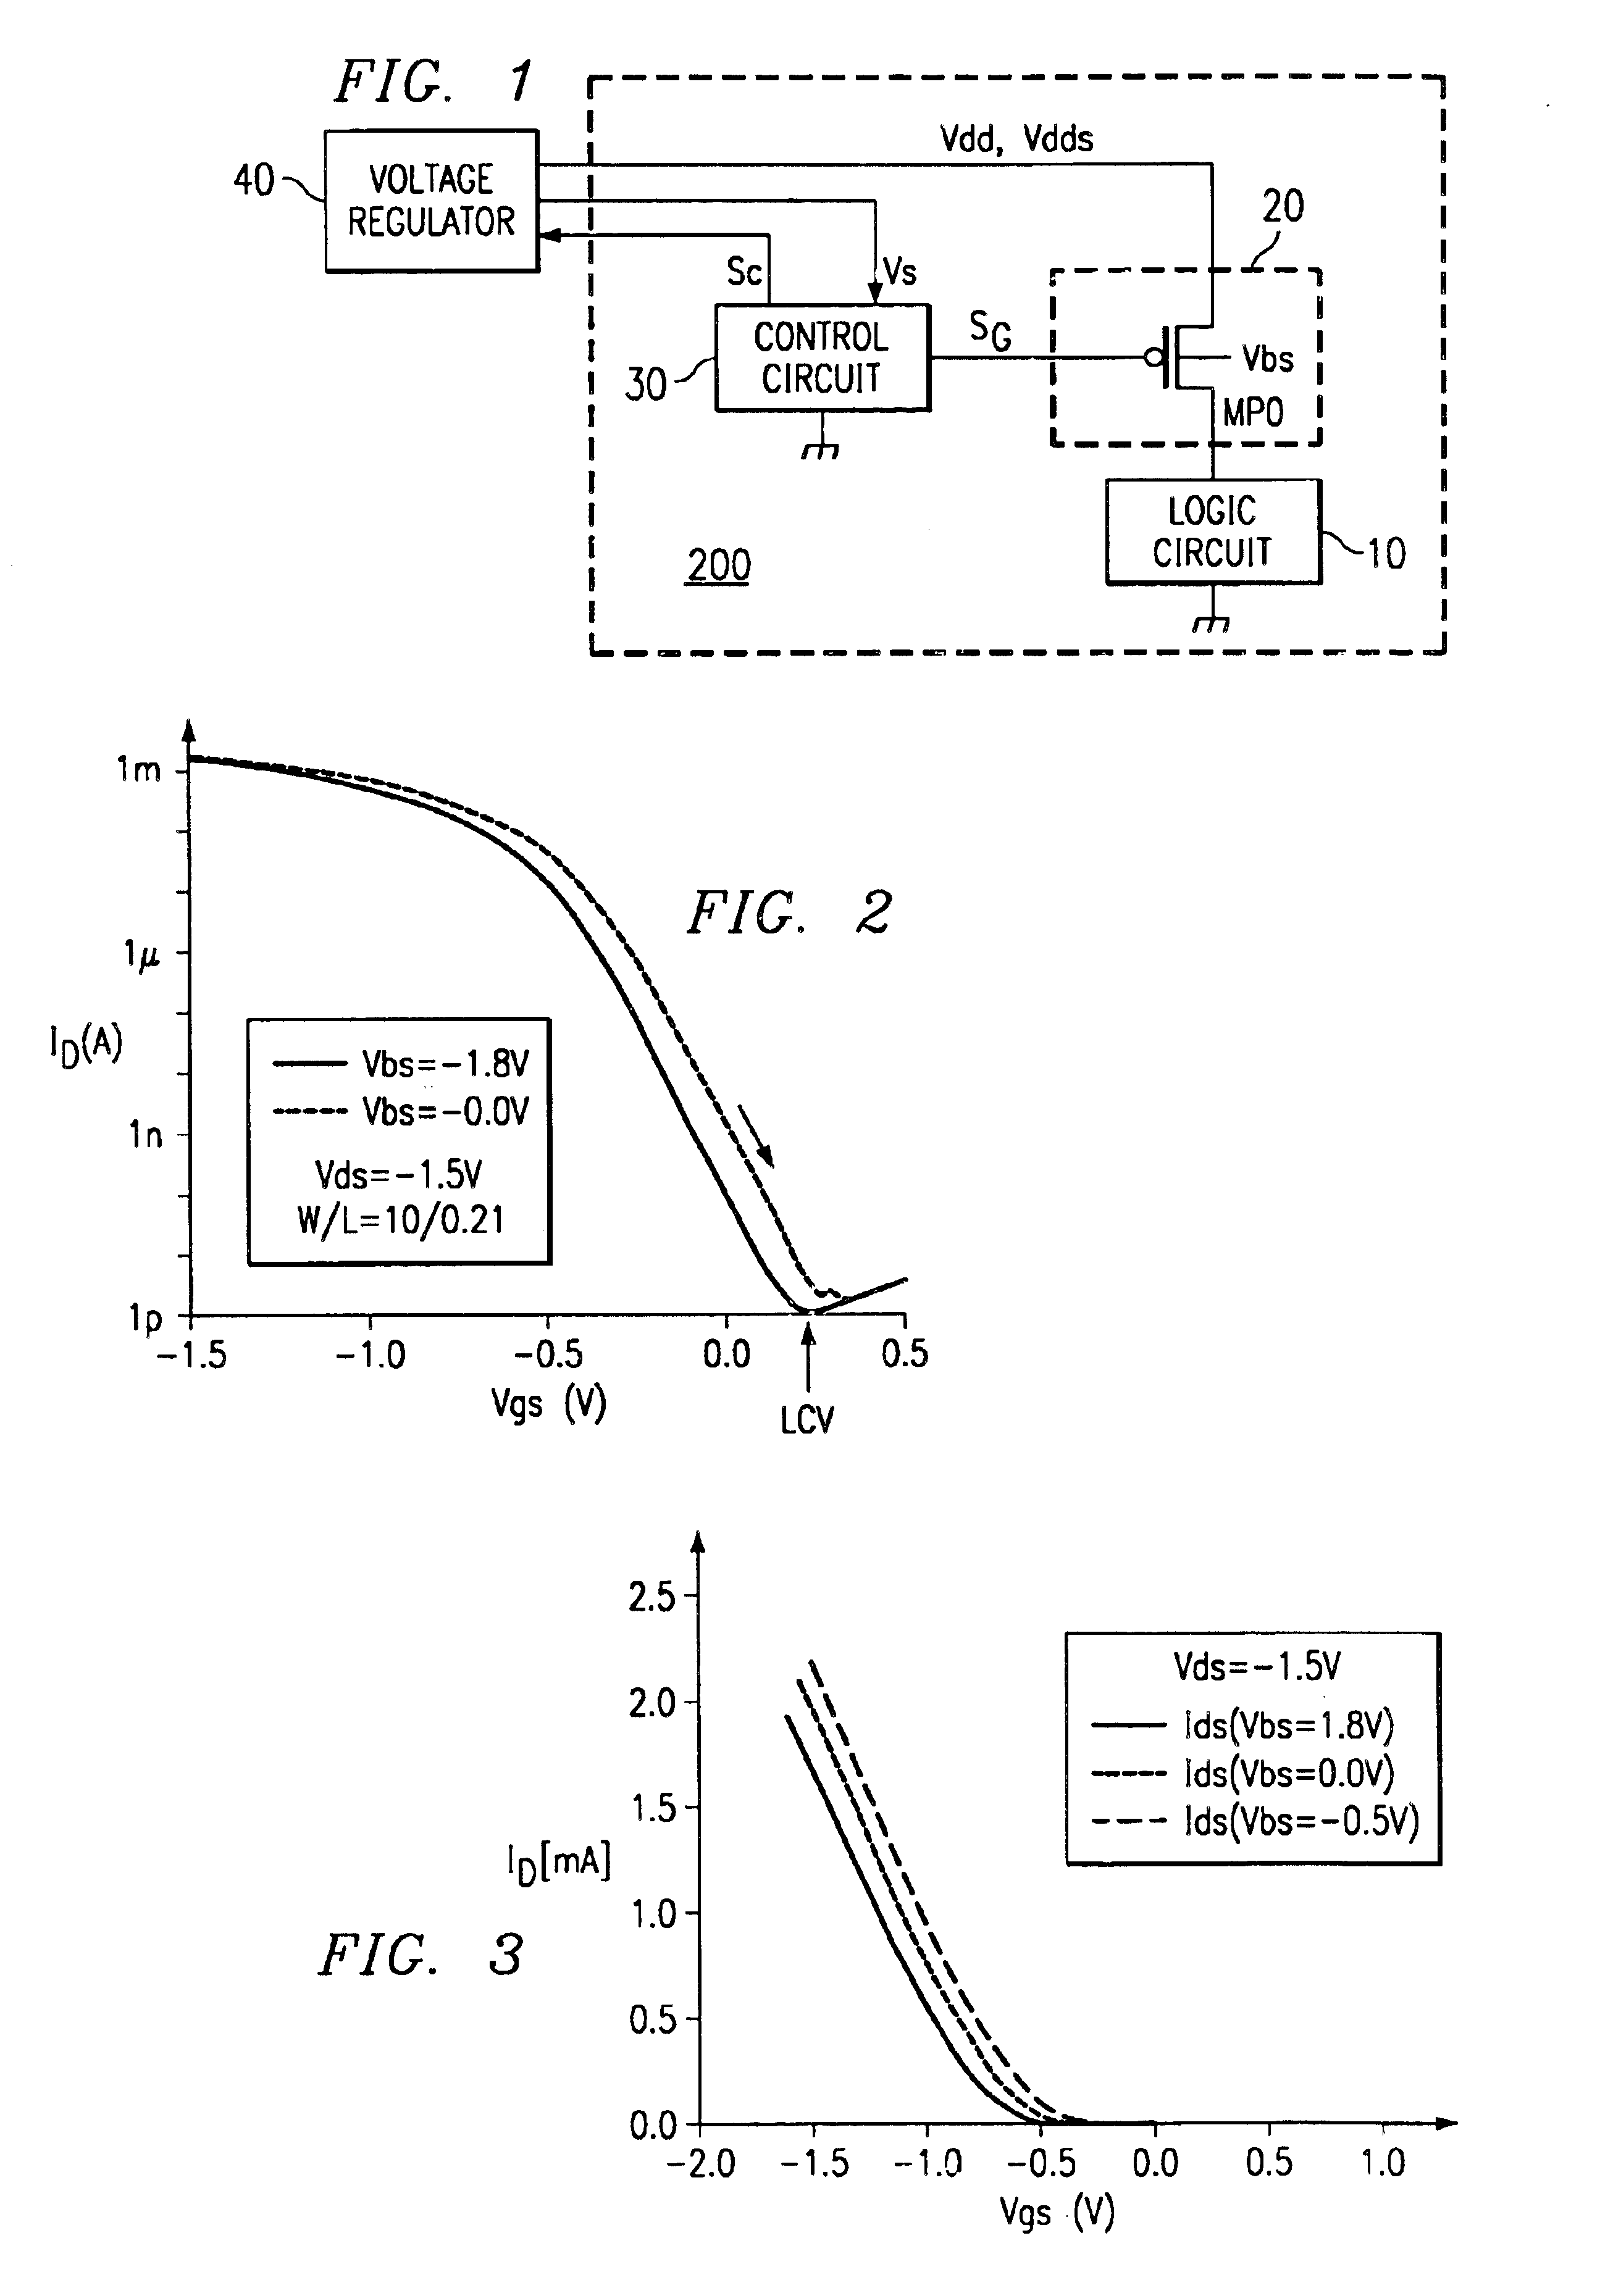 Suppressing the leakage current in an integrated circuit